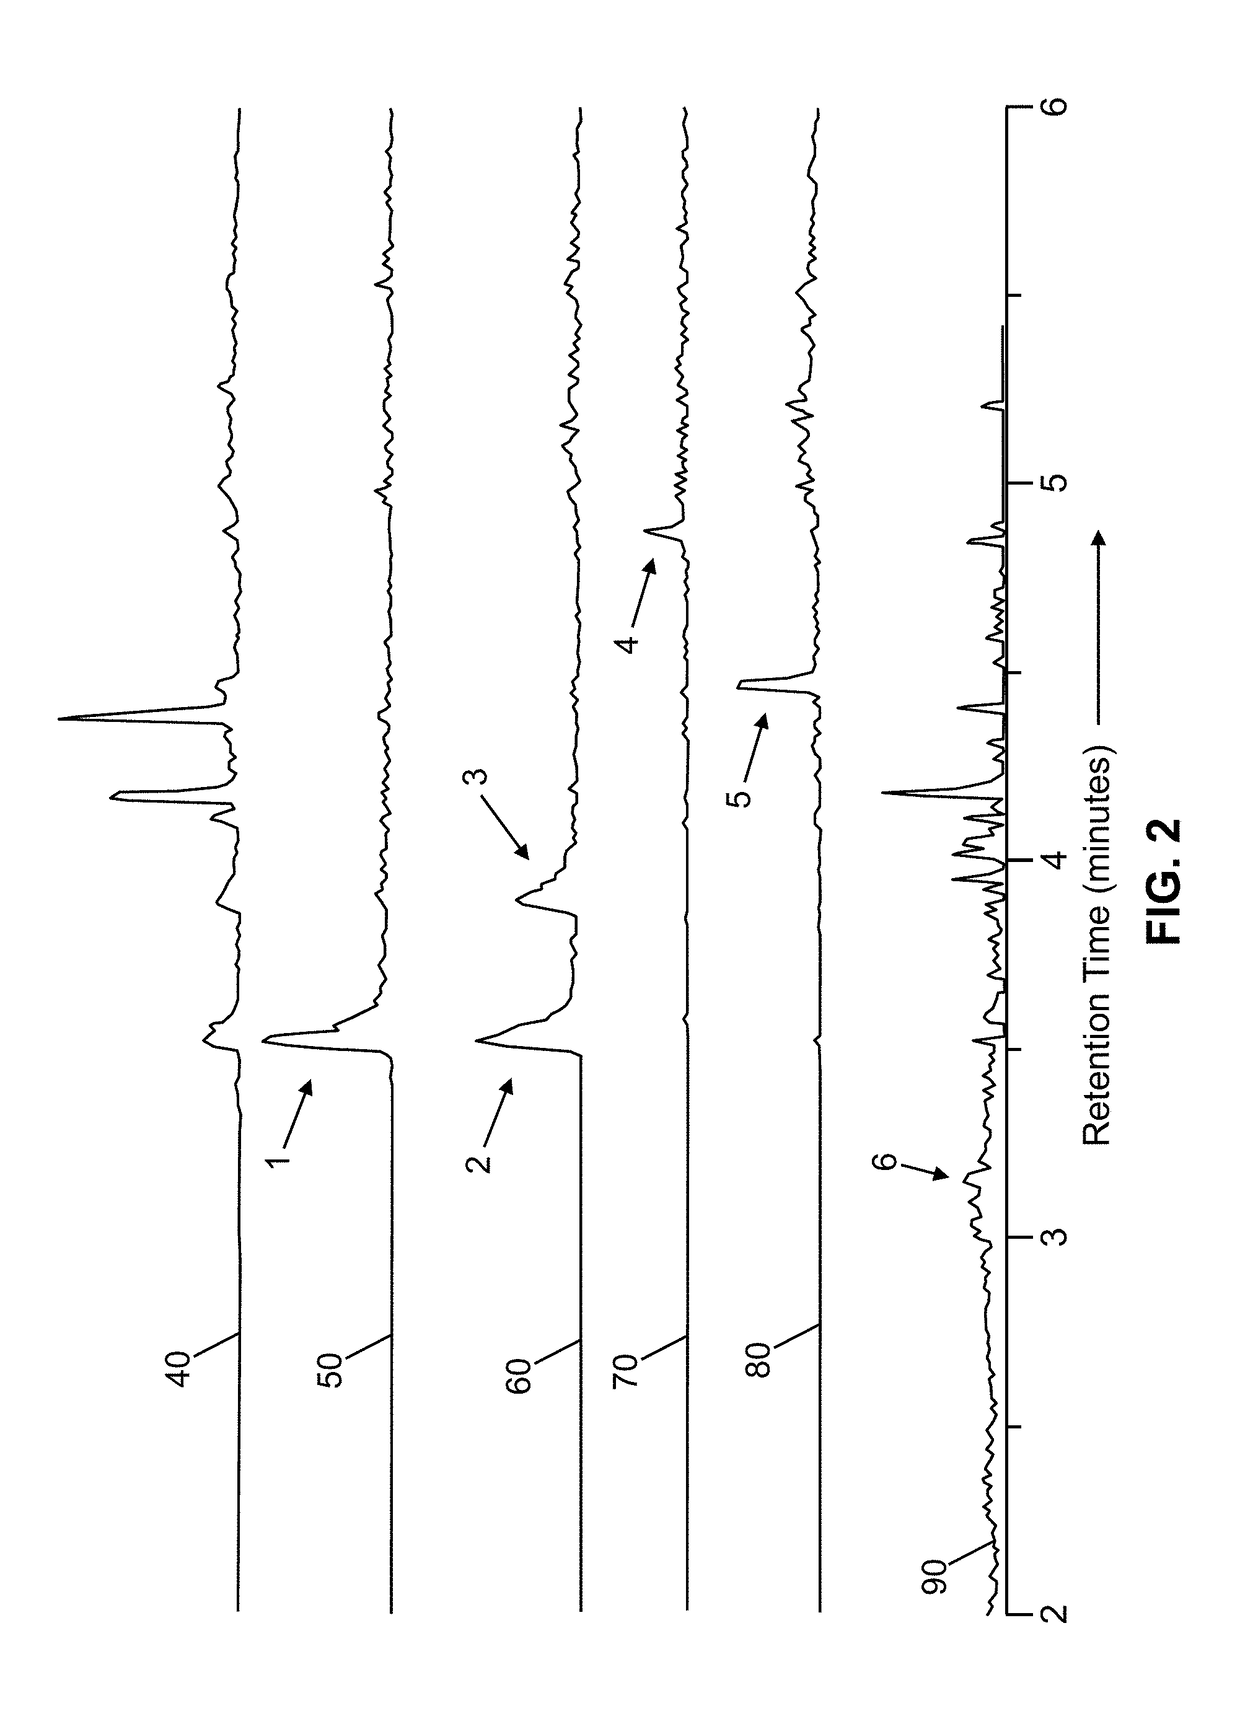 Methods for data-dependent mass spectrometry of mixed intact protein analytes